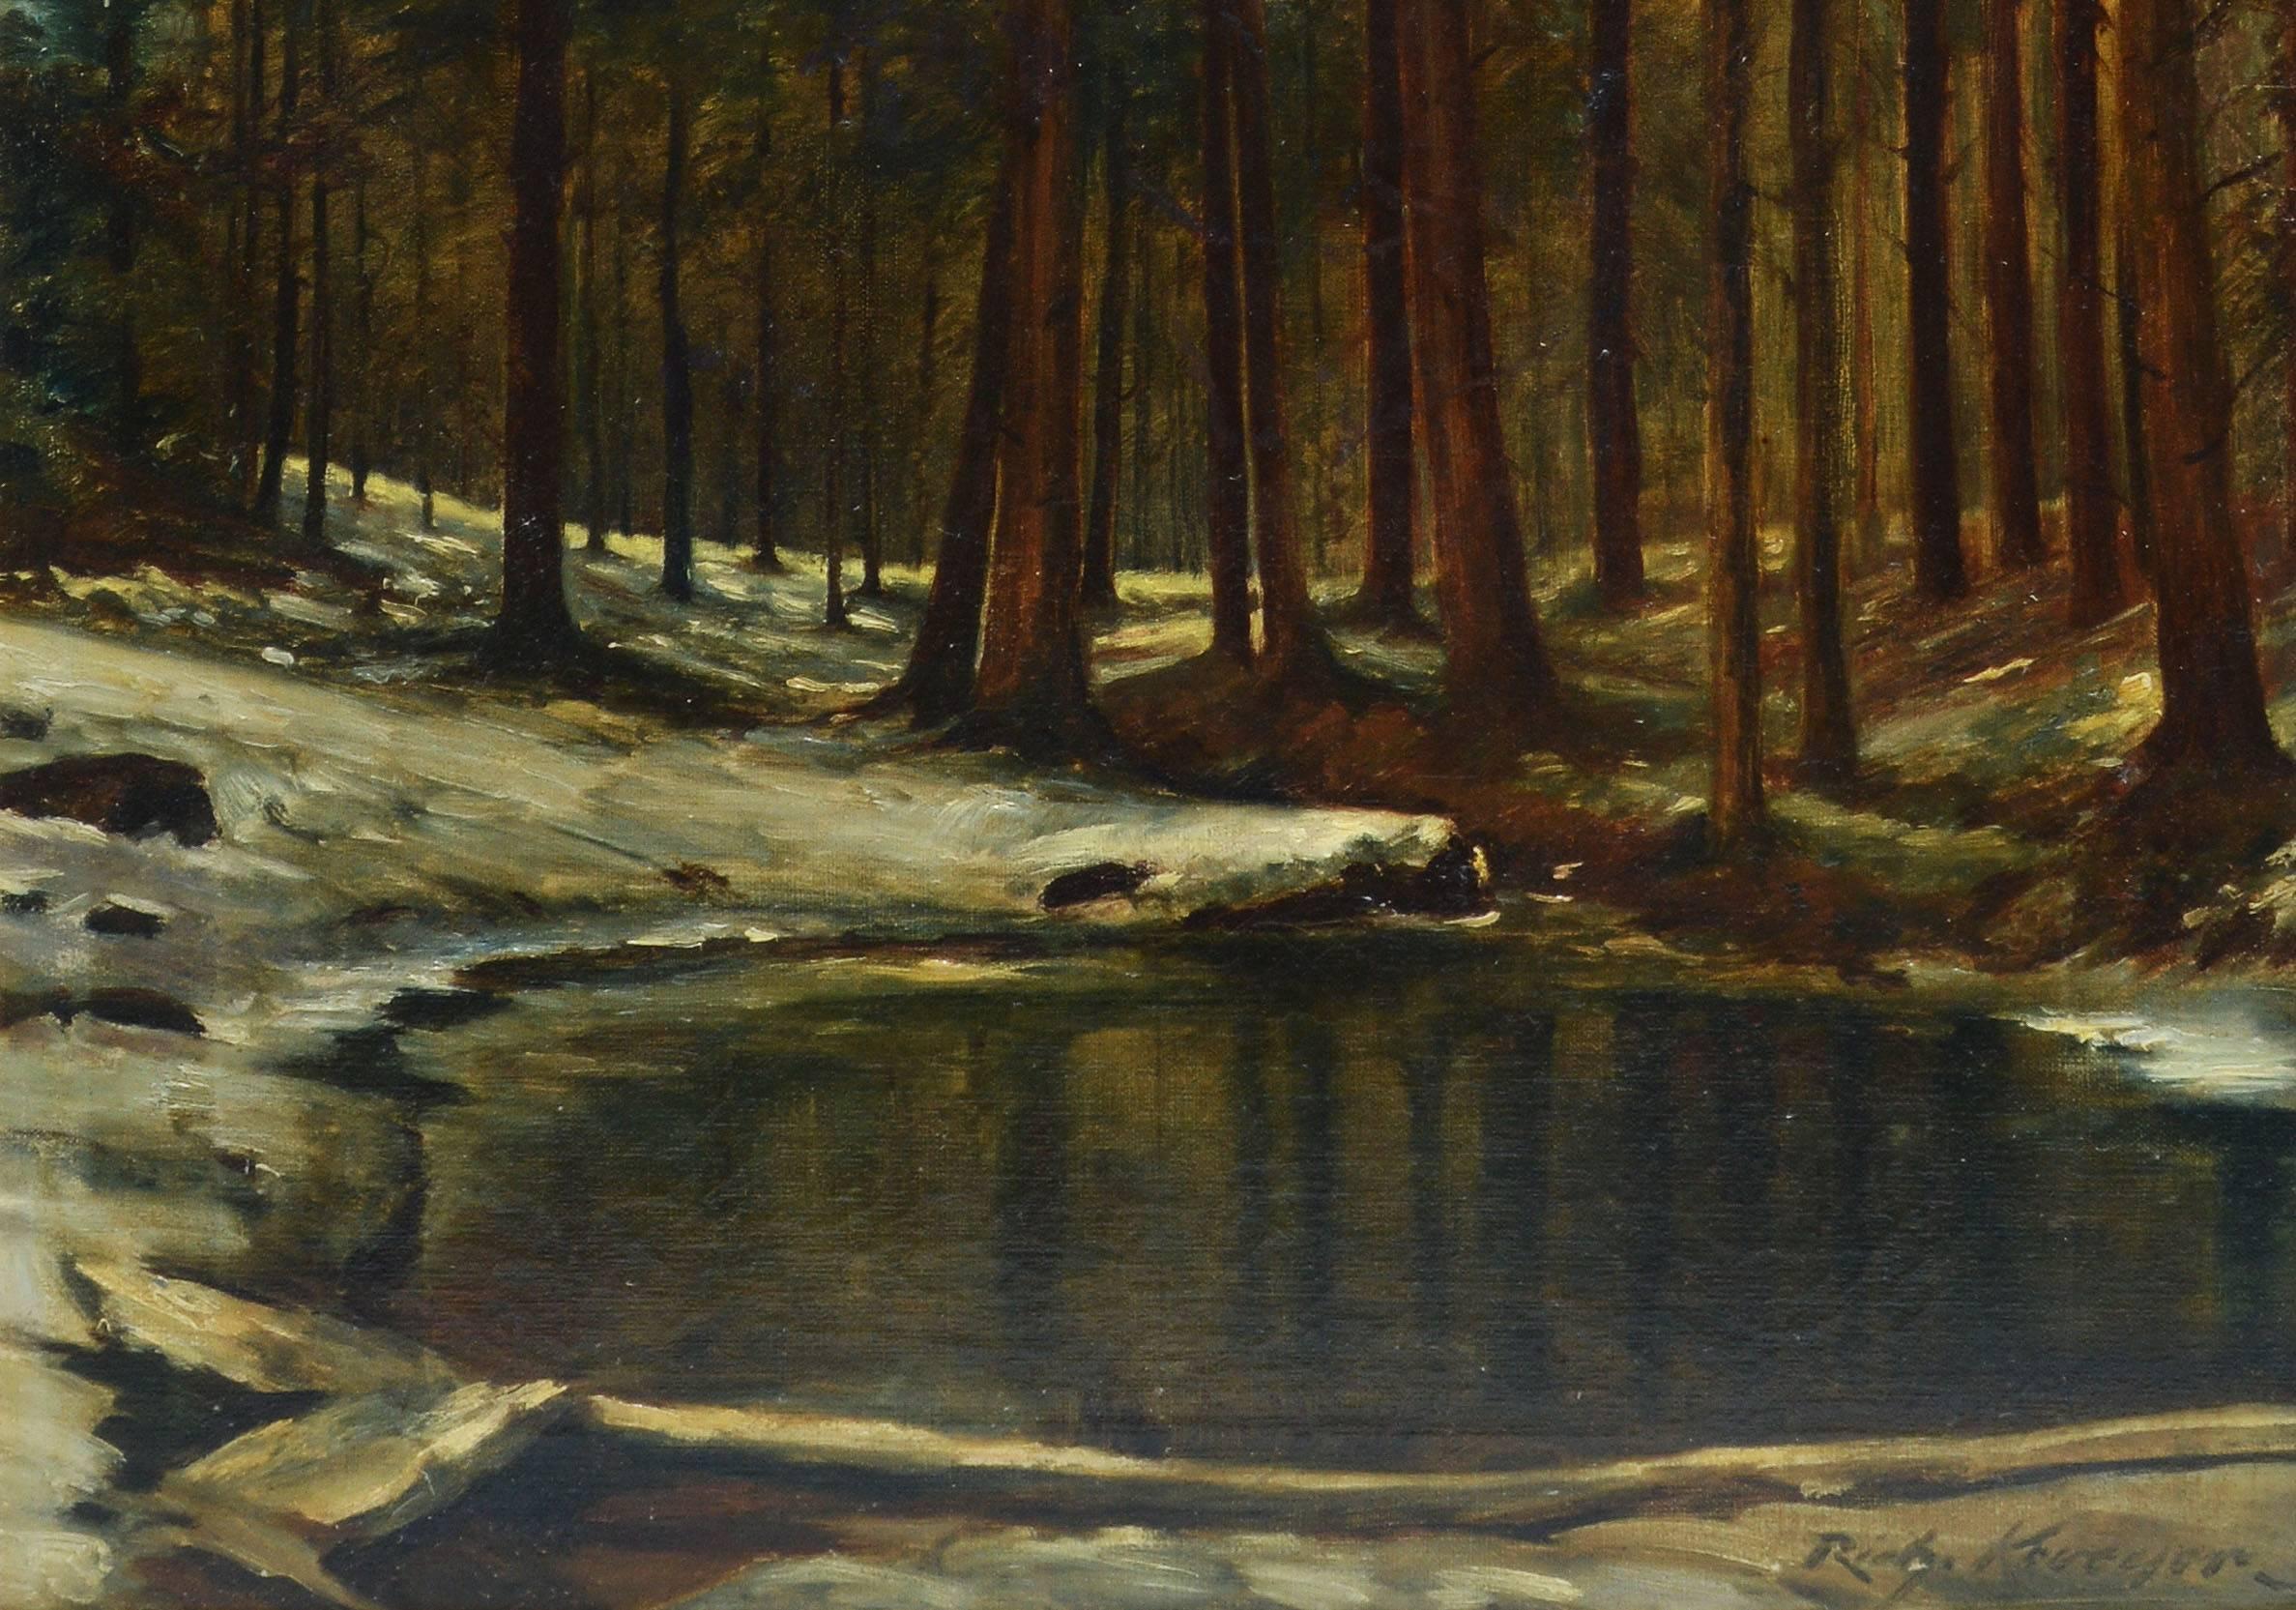 Realist forest landscape with a pond by Richard Kruger (born 1880).  Oil on canvas, circa 1910.  Signed lower right, "Rich Kruger".  Displayed in a giltwood frame.  Image size, 16"L x 20.5"H, overall 19"L x 23"H.